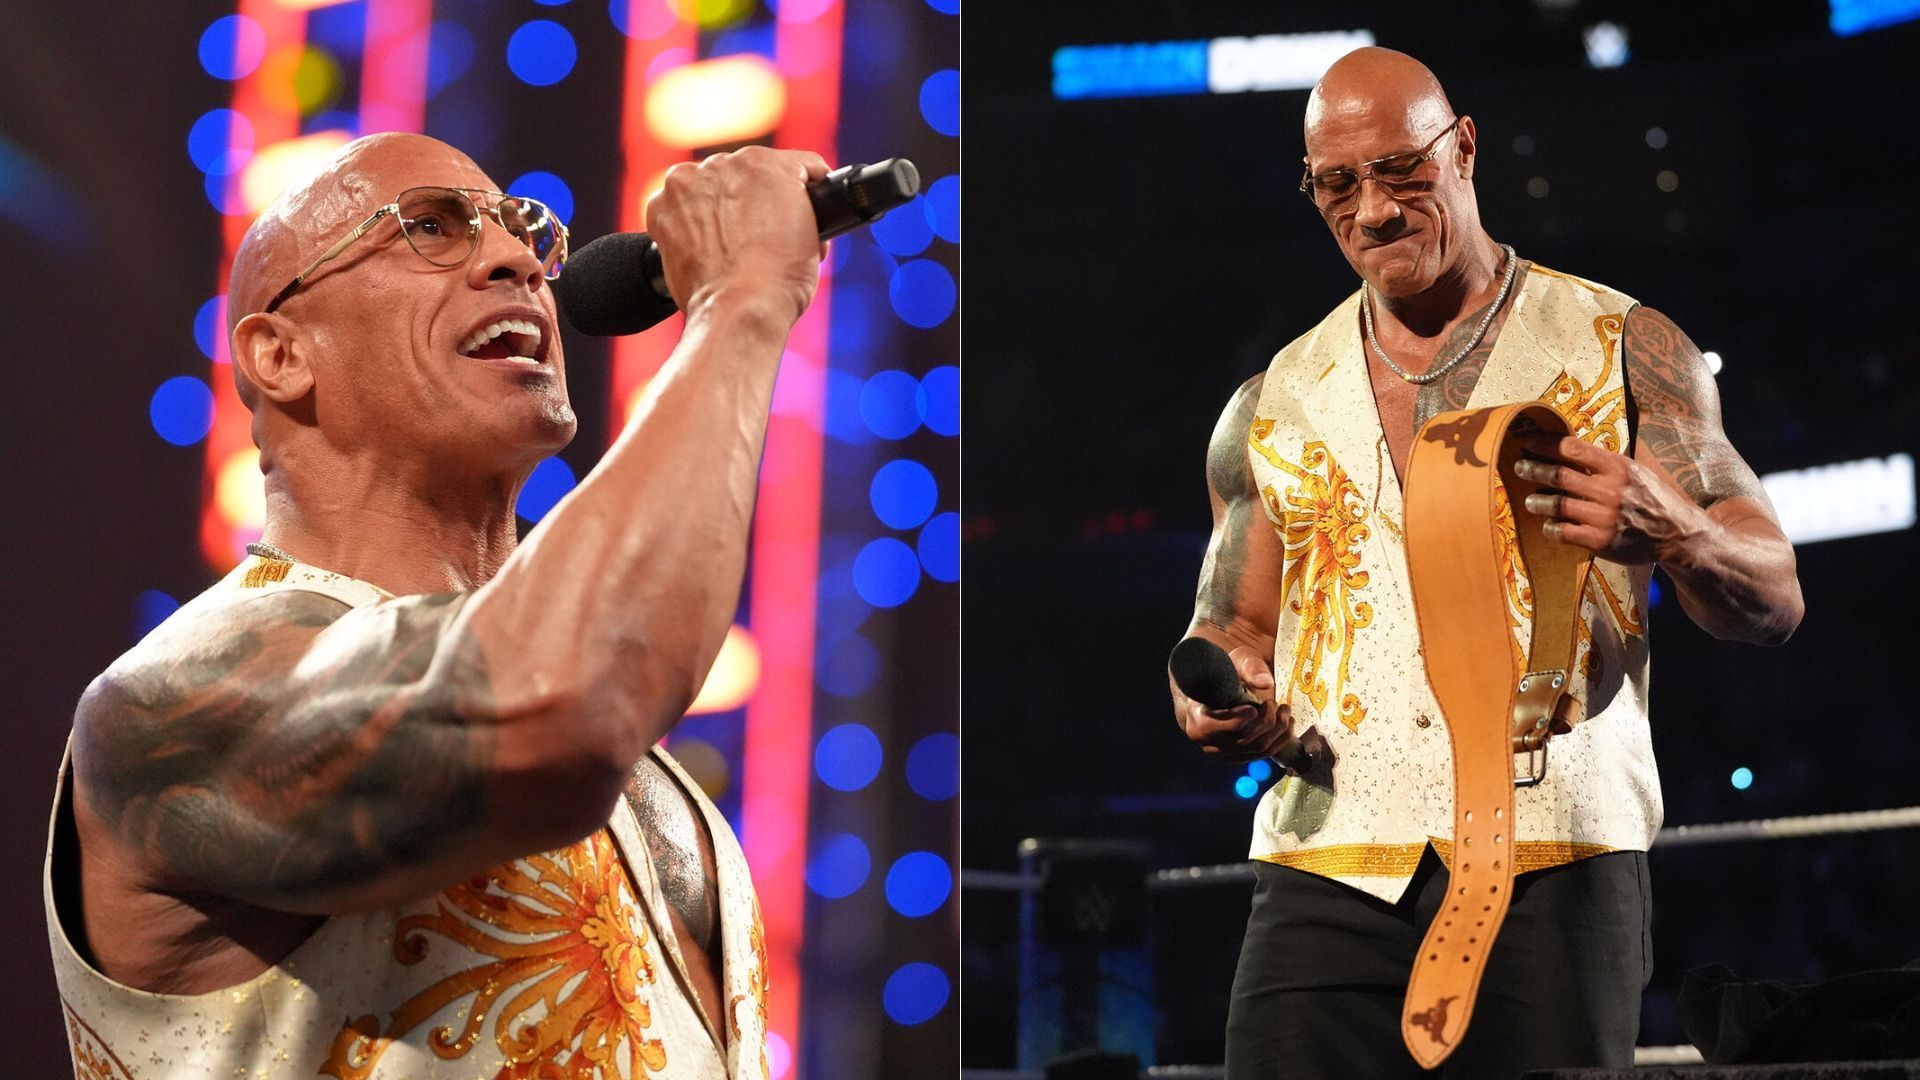 The Rock recently turned heel for the first time since 2003